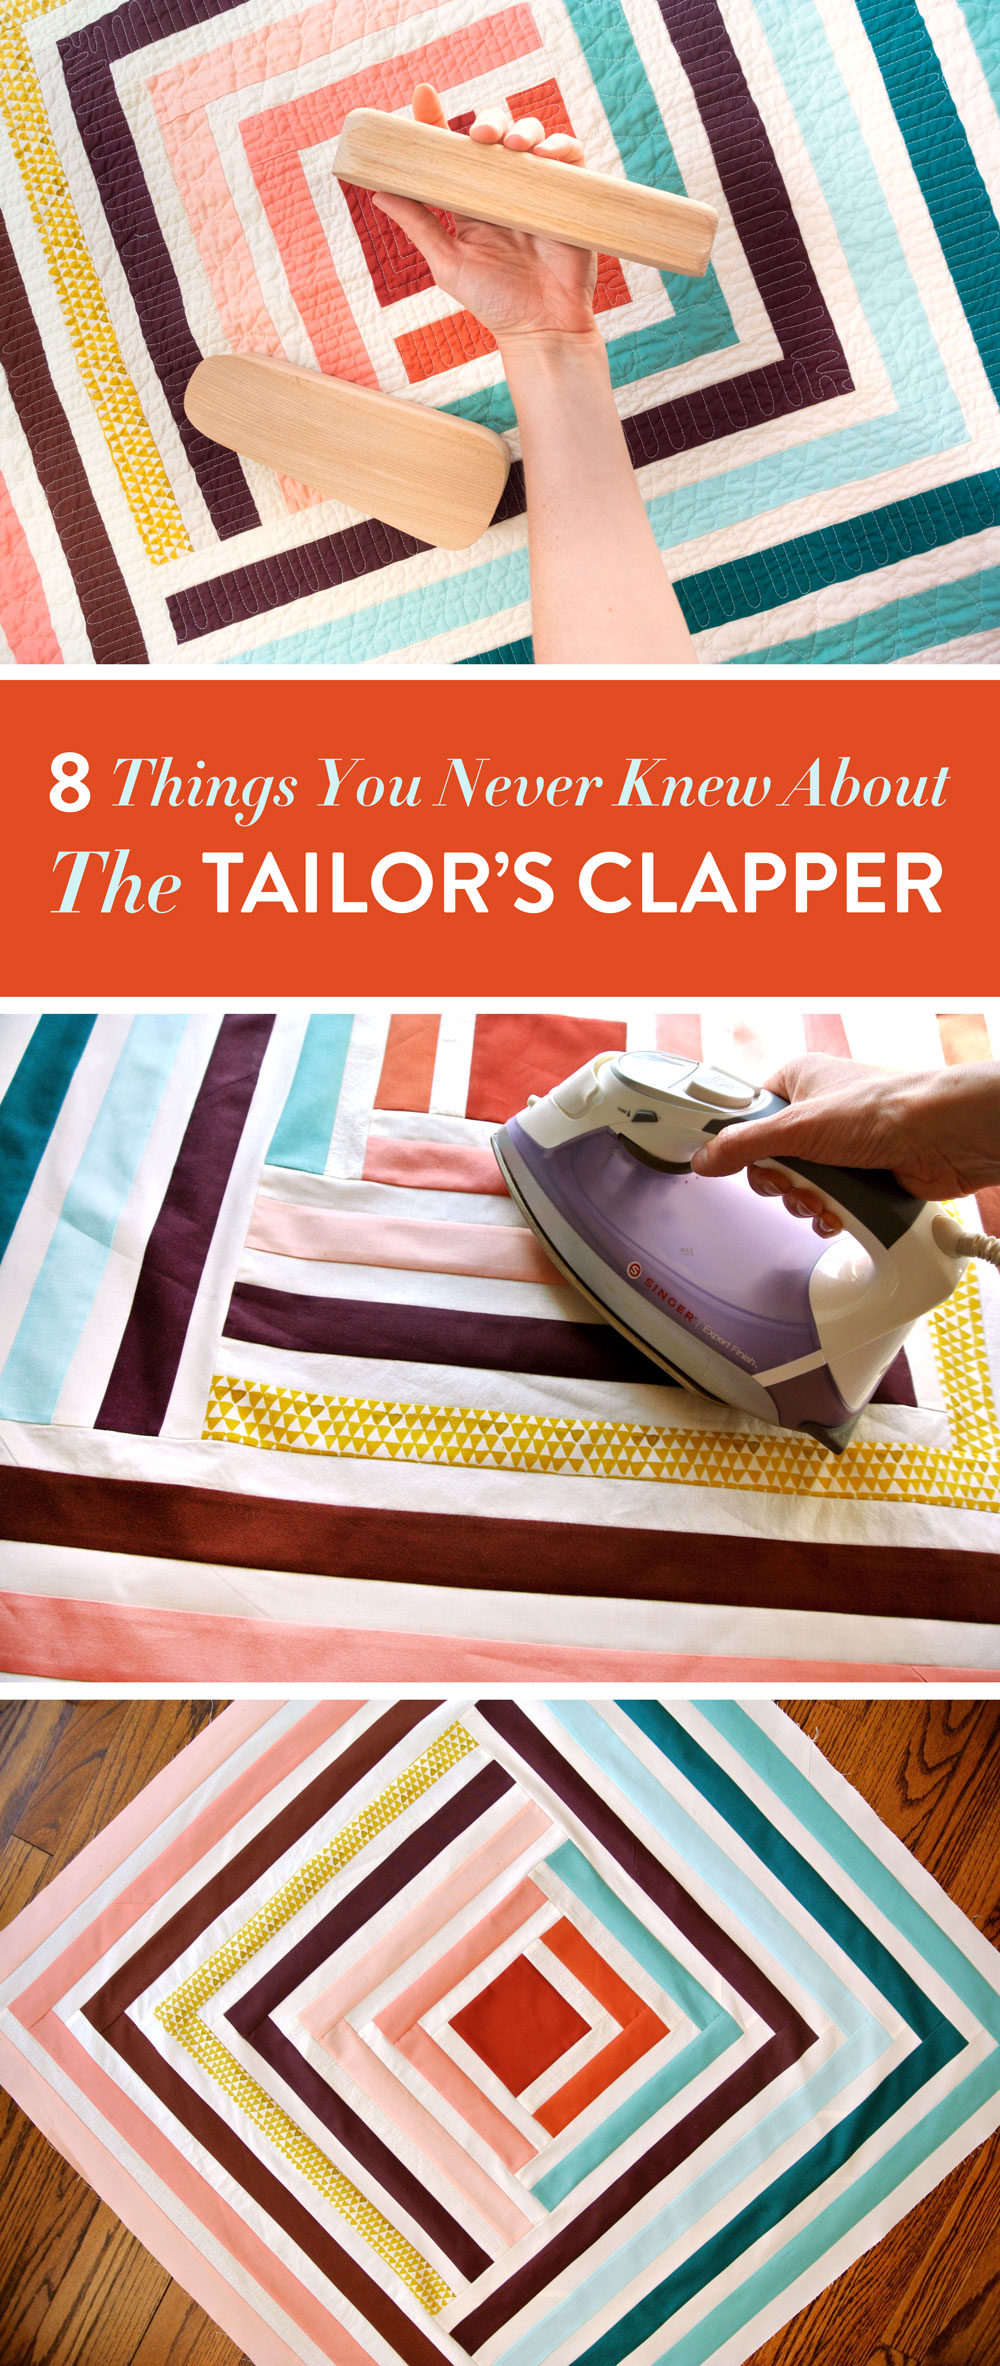 Although the tailor's clapper originates in garment sewing, quilters have adopted this tool with excitement. Here are 8 reasons you need a tailor's clapper in your quilting toolbox! | Suzy Quilts https://suzyquilts.com/tailors-clapper